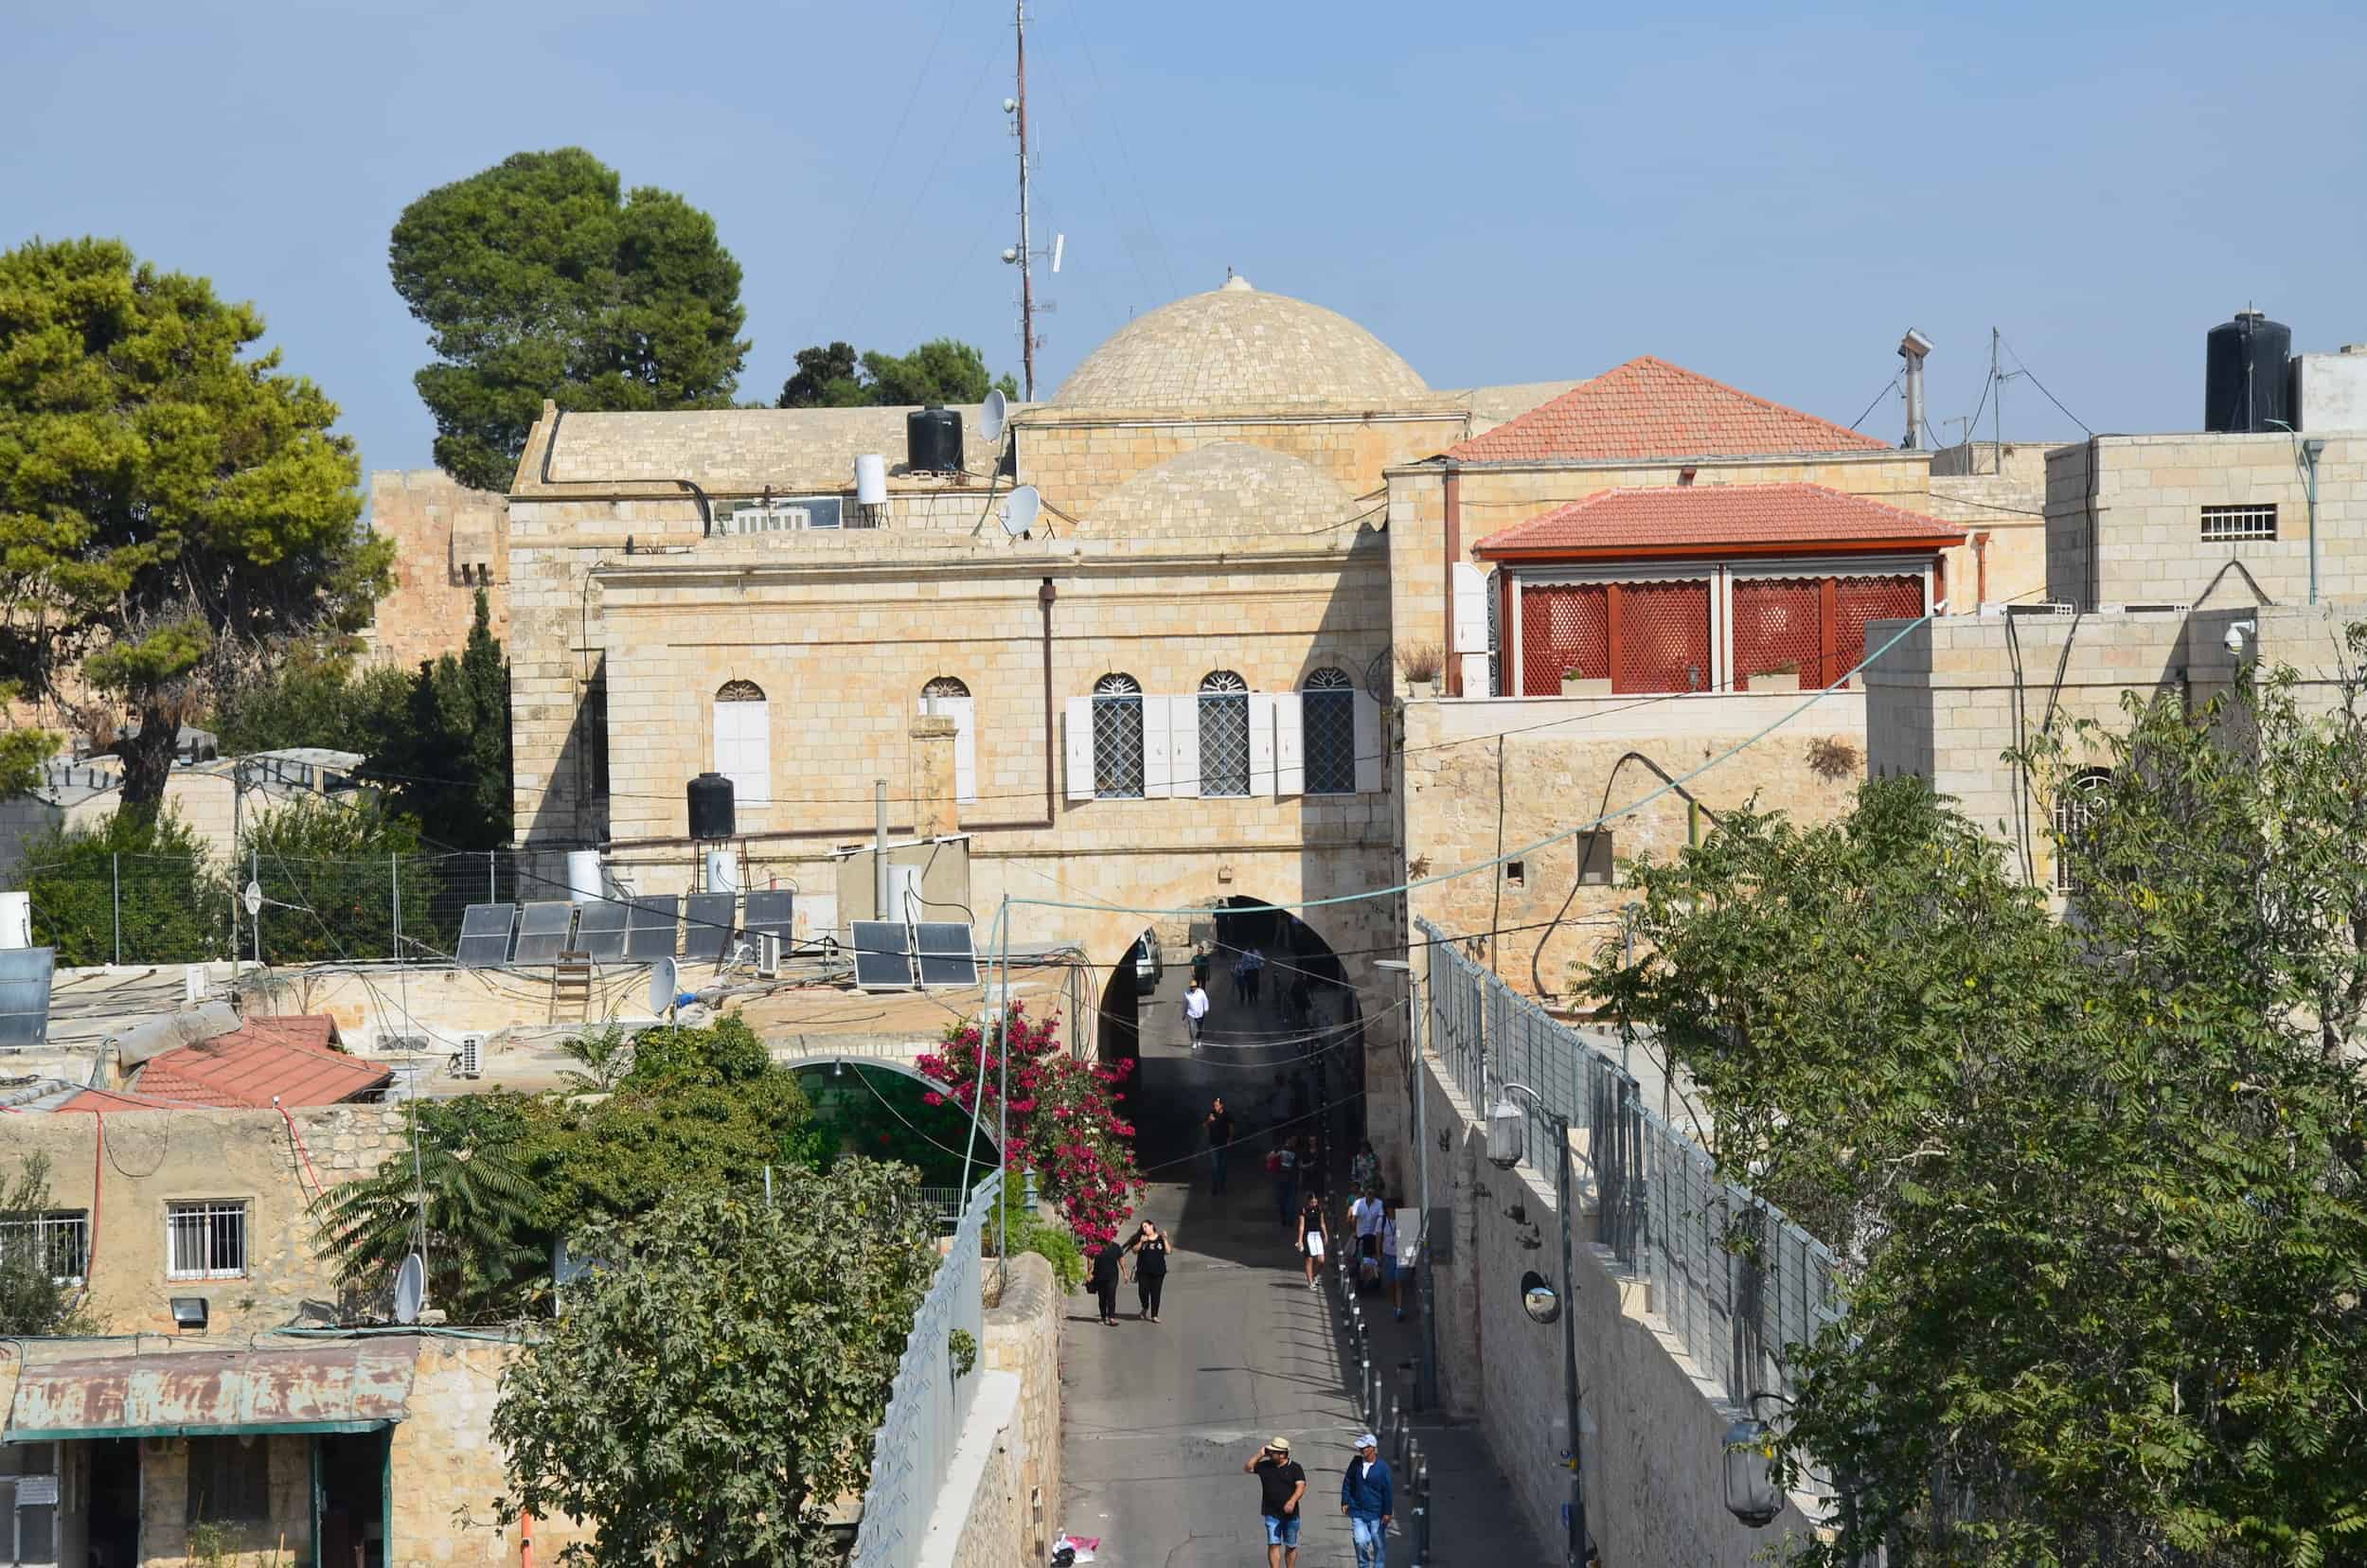 Armenian Patriarchate of Jerusalem from the Ramparts Walk